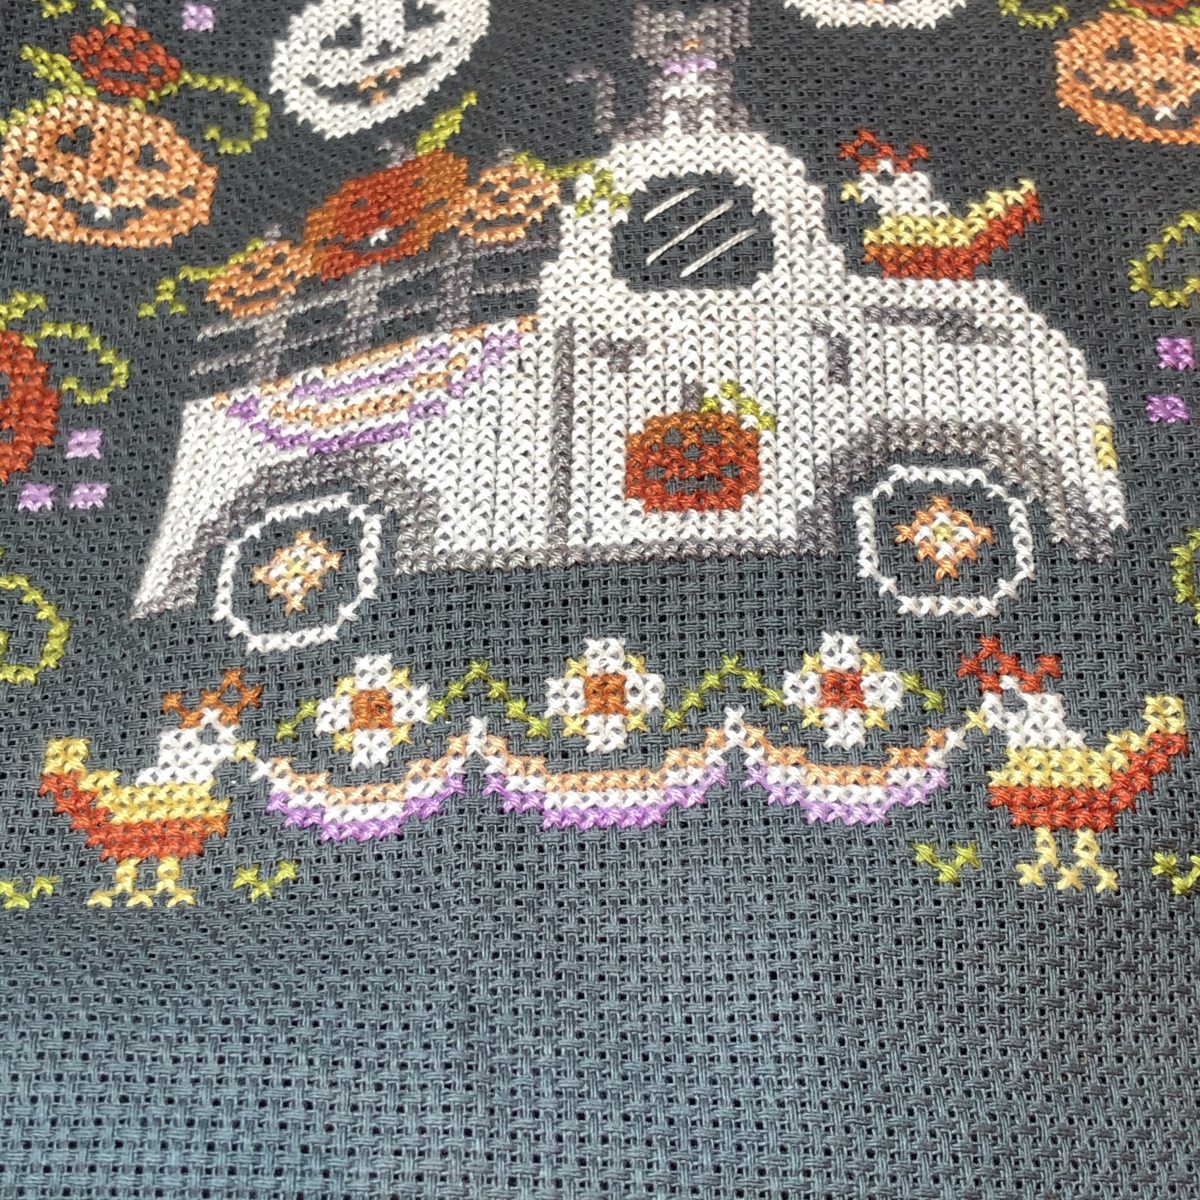 CROSS STITCH DIARY: The final weeks of Sitchtober 2020